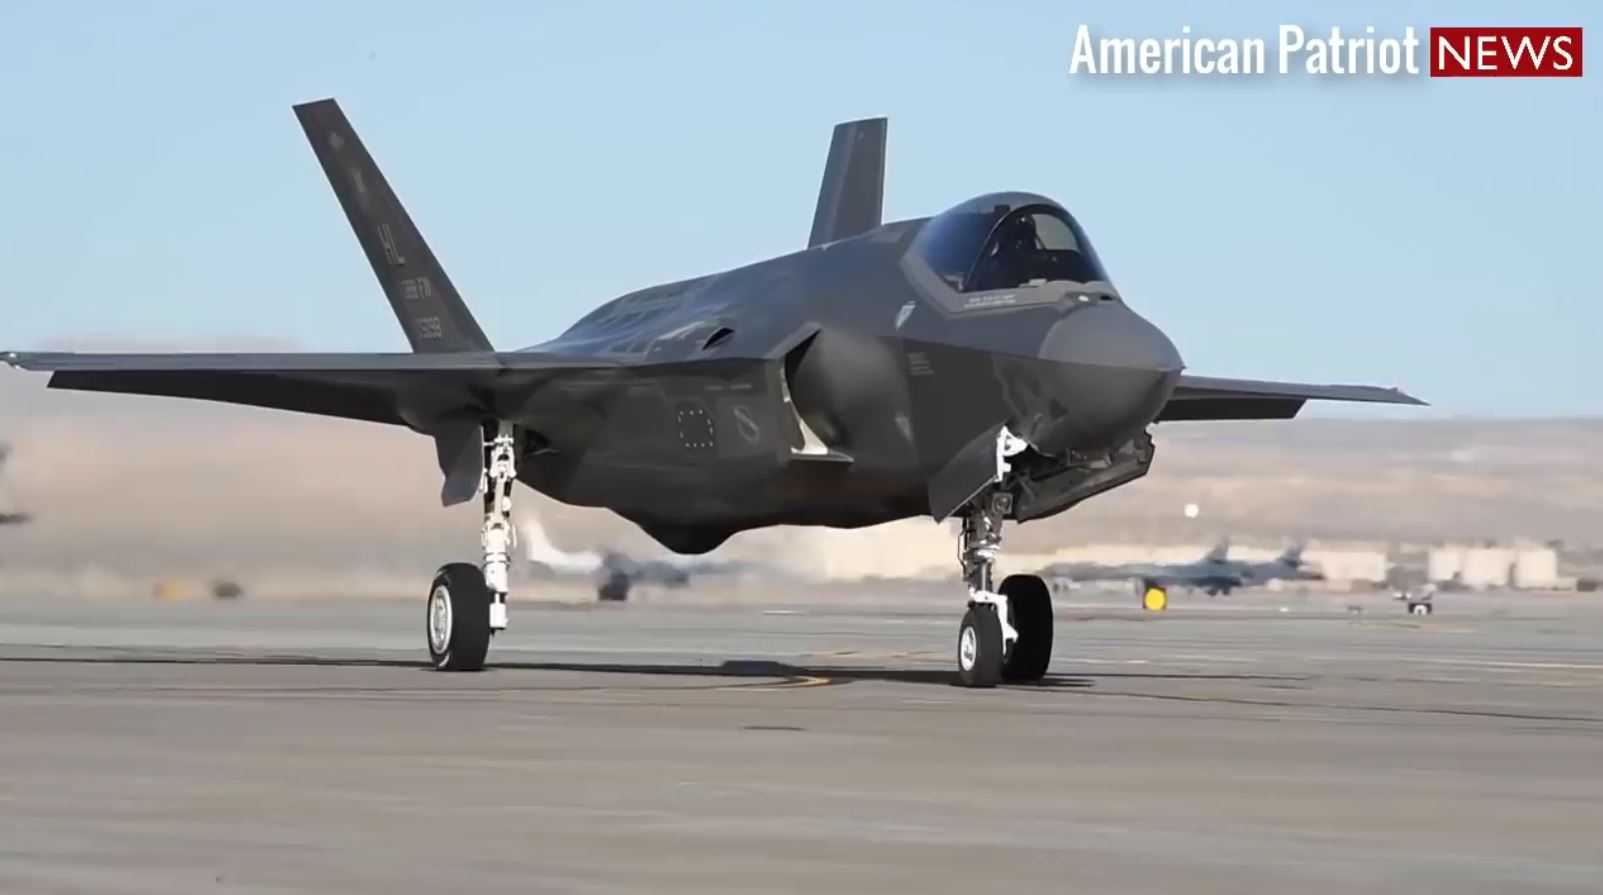 Incredible Video of F-35 Lightning II Stealth Fighter Jet in Action U.S. Air Force